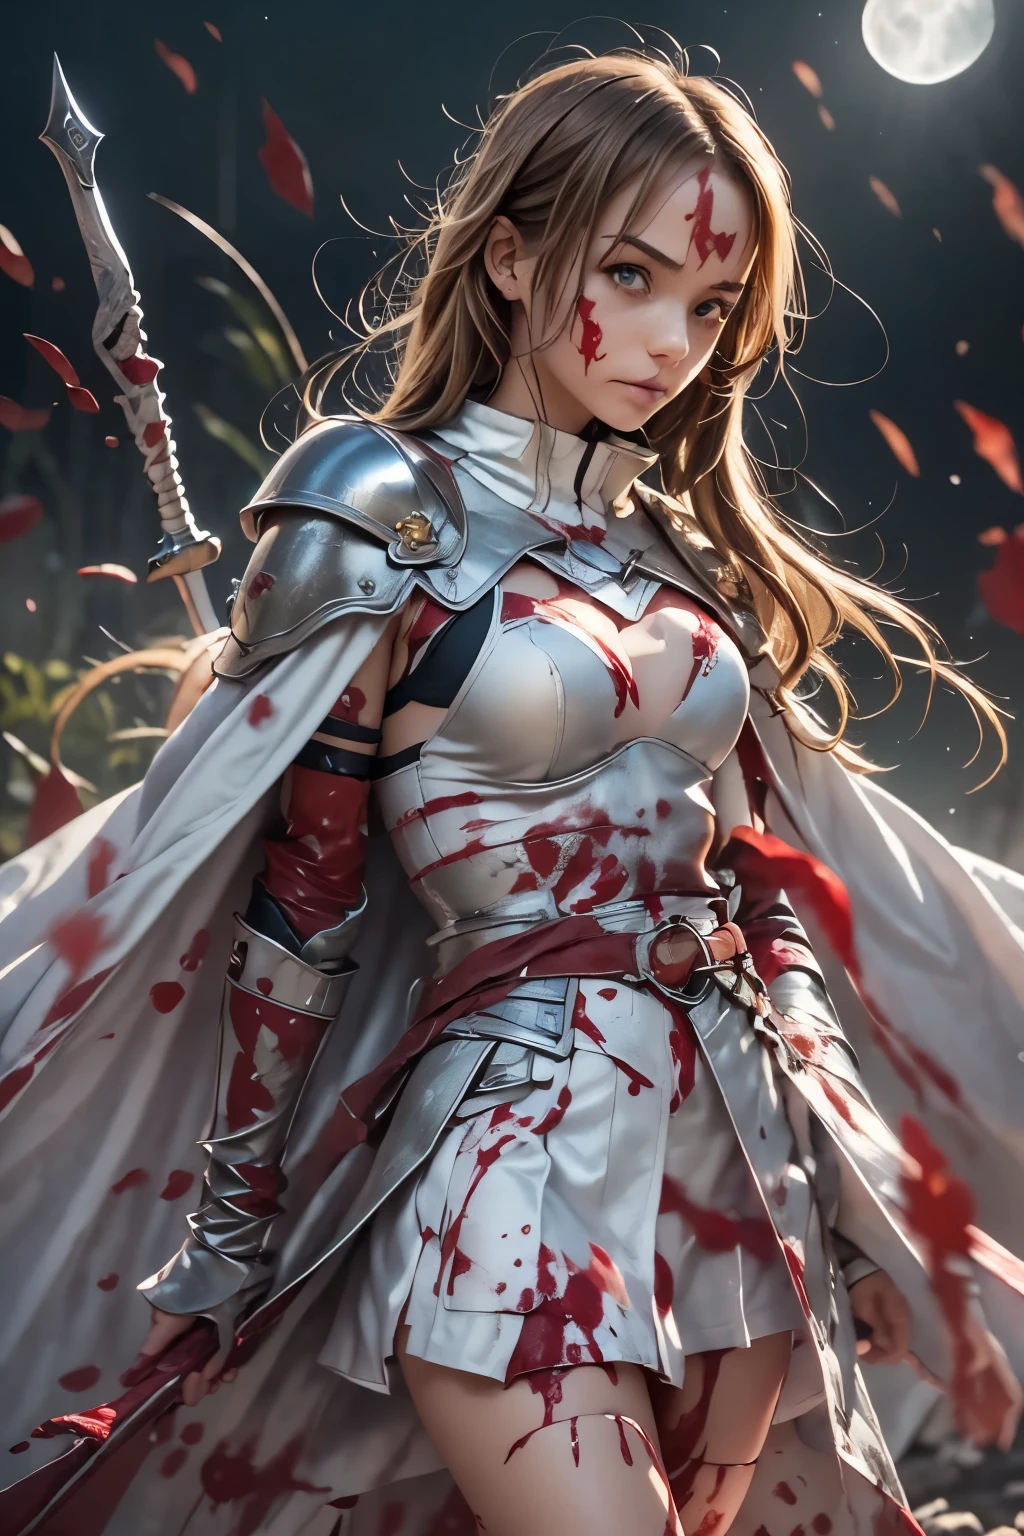 8k,(Asuna(sao): 1.6),one Girl, Solo,(perfect anatomy:1.43), (medium Hair:1.55) ,(Half Up:1.45),Bangs, Brown Eyes,Fine Eyes,(sad smile:1.3),white thighhighs,(Brown Hair:1.6),blood-soaked boots,(18 years old:1.5),Full Body,(fusion of bloody white silver full plate armor and blood-soaked long cape:1.63),(Bare Shoulders:1.5),(mini Skirt:1.26),(holding blood-soaked one rapier:1.43),(standing on moonlit night blood pool battlefield:1.52),Fantasy,(blood effect:1.53),pov,eye-level view,(drop shadow:1.21)